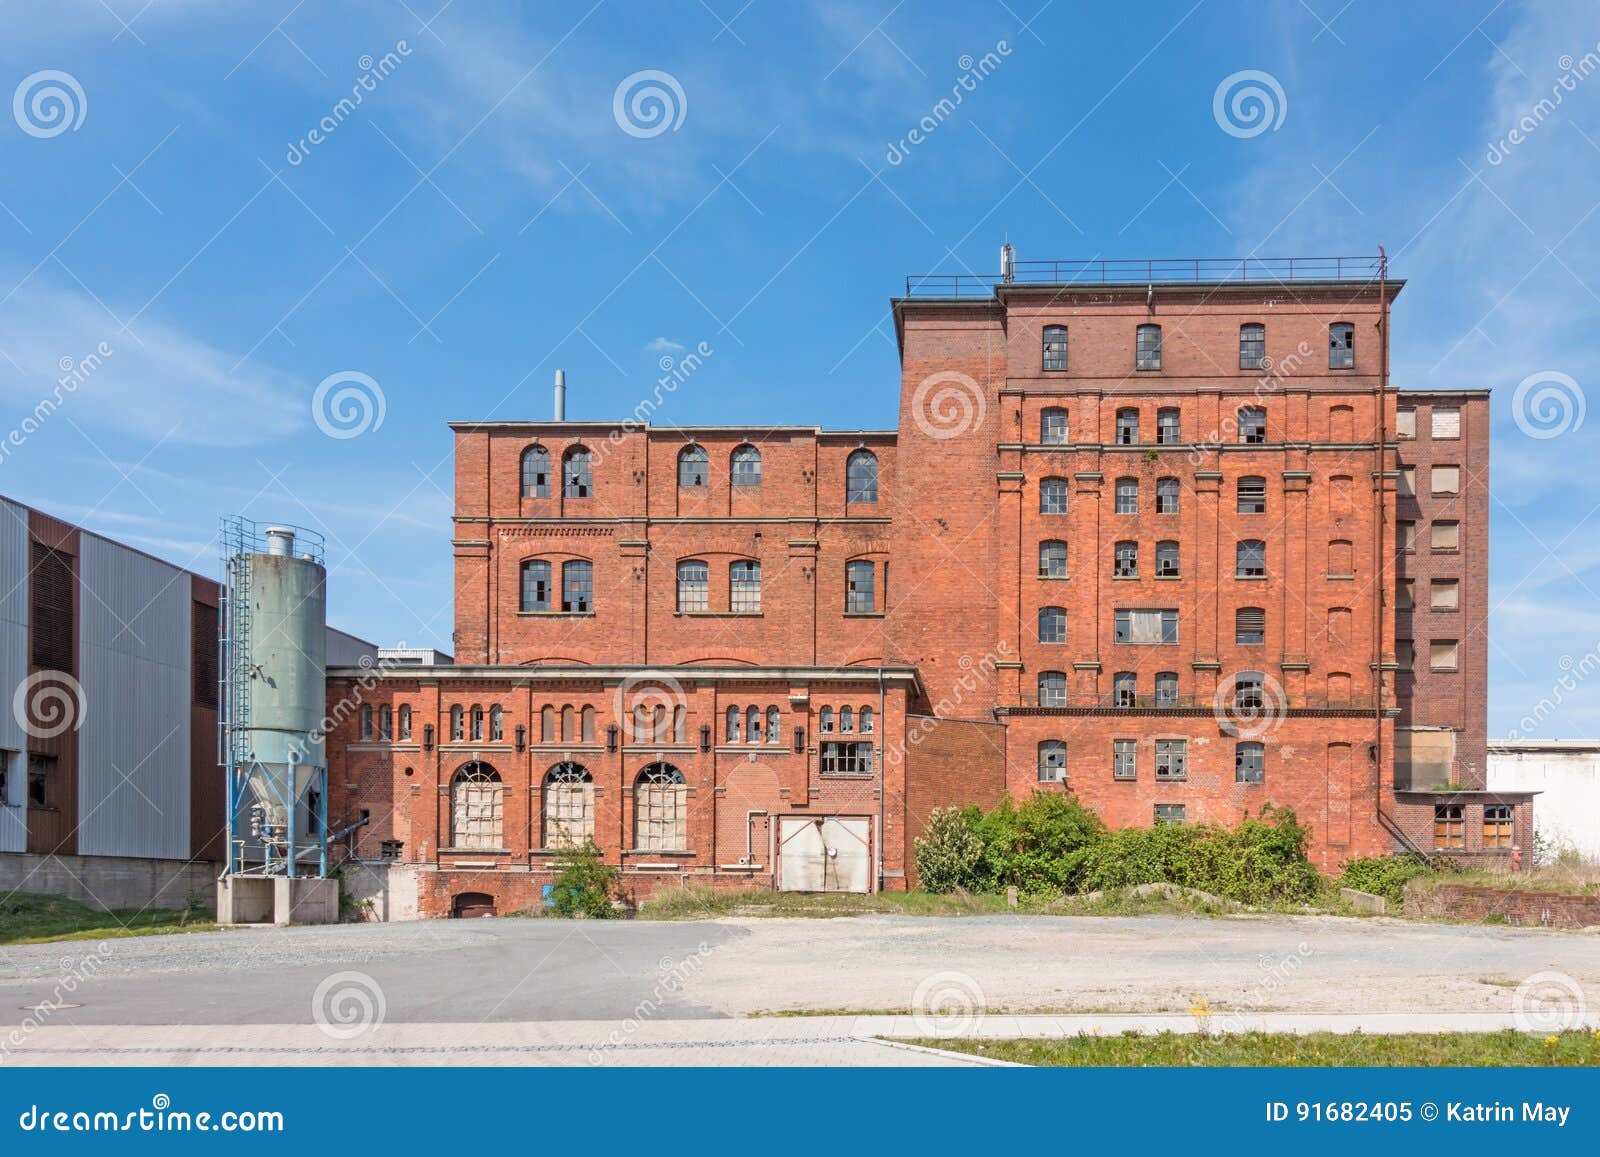 exterior view of a decayed factory building made of brick